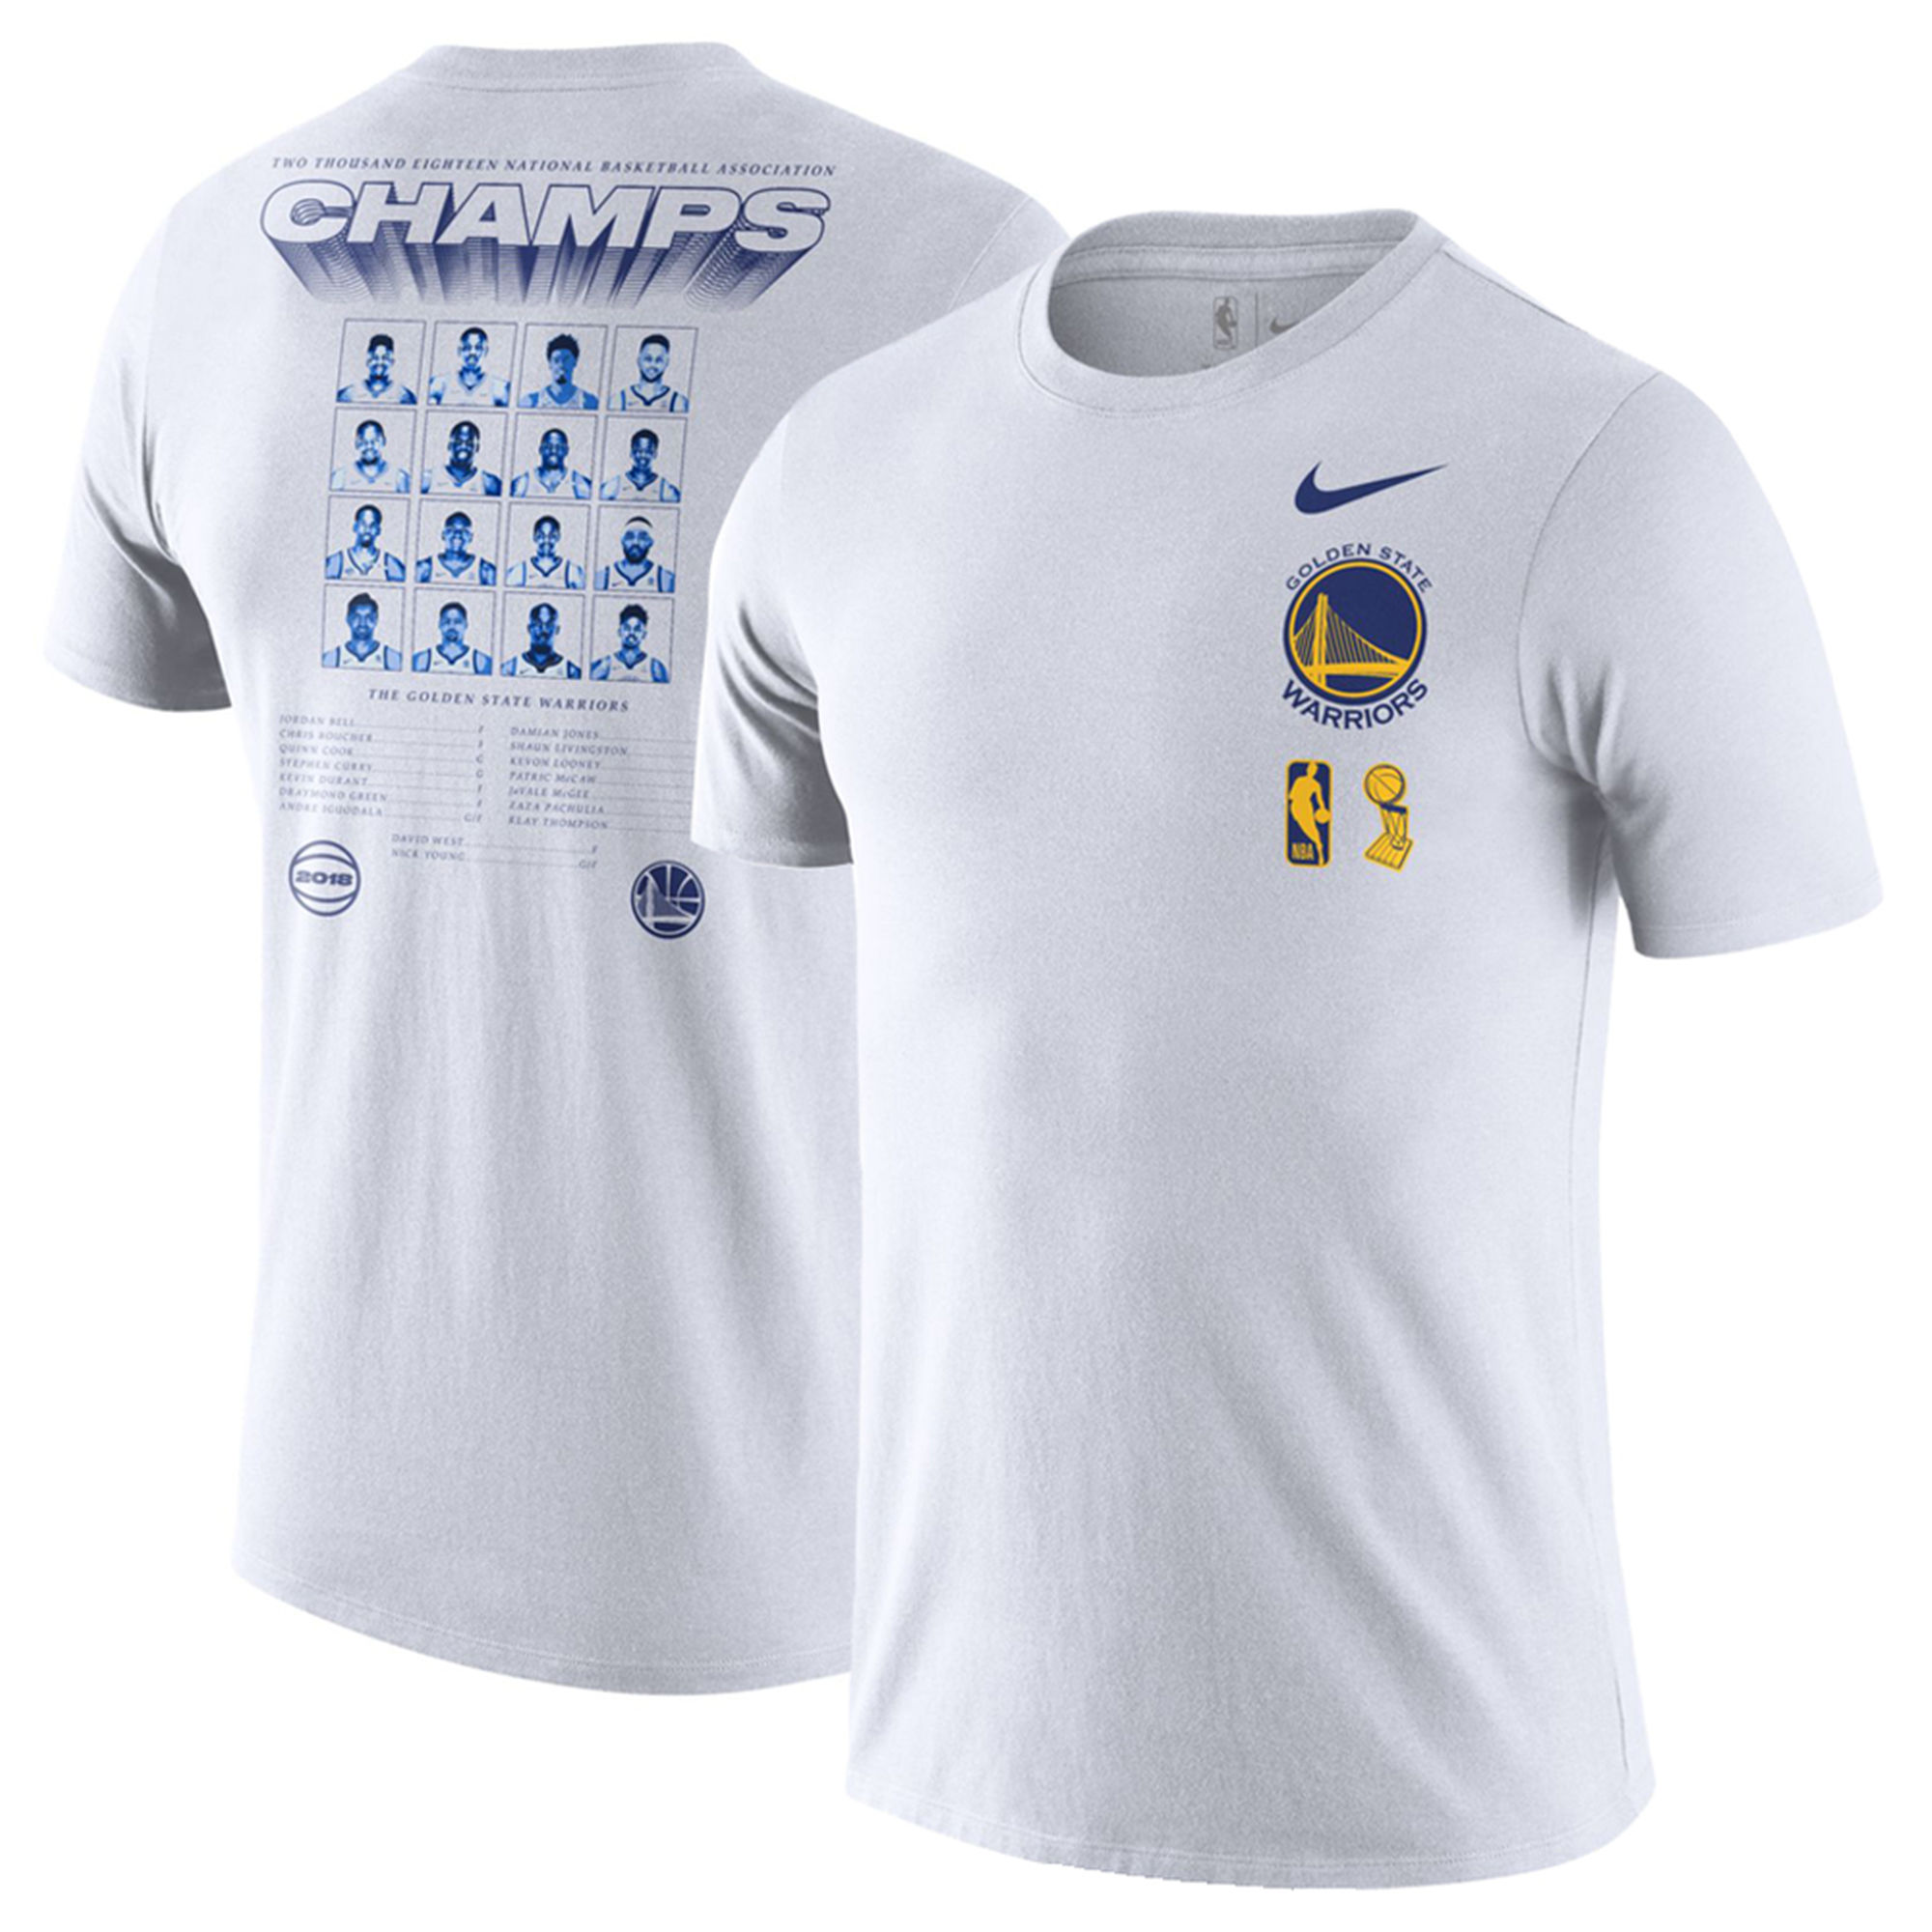 Golden State Warriors Nike 2018 NBA Finals Champions Team Roster Dri-Fit Cotton T-Shirt White - Click Image to Close